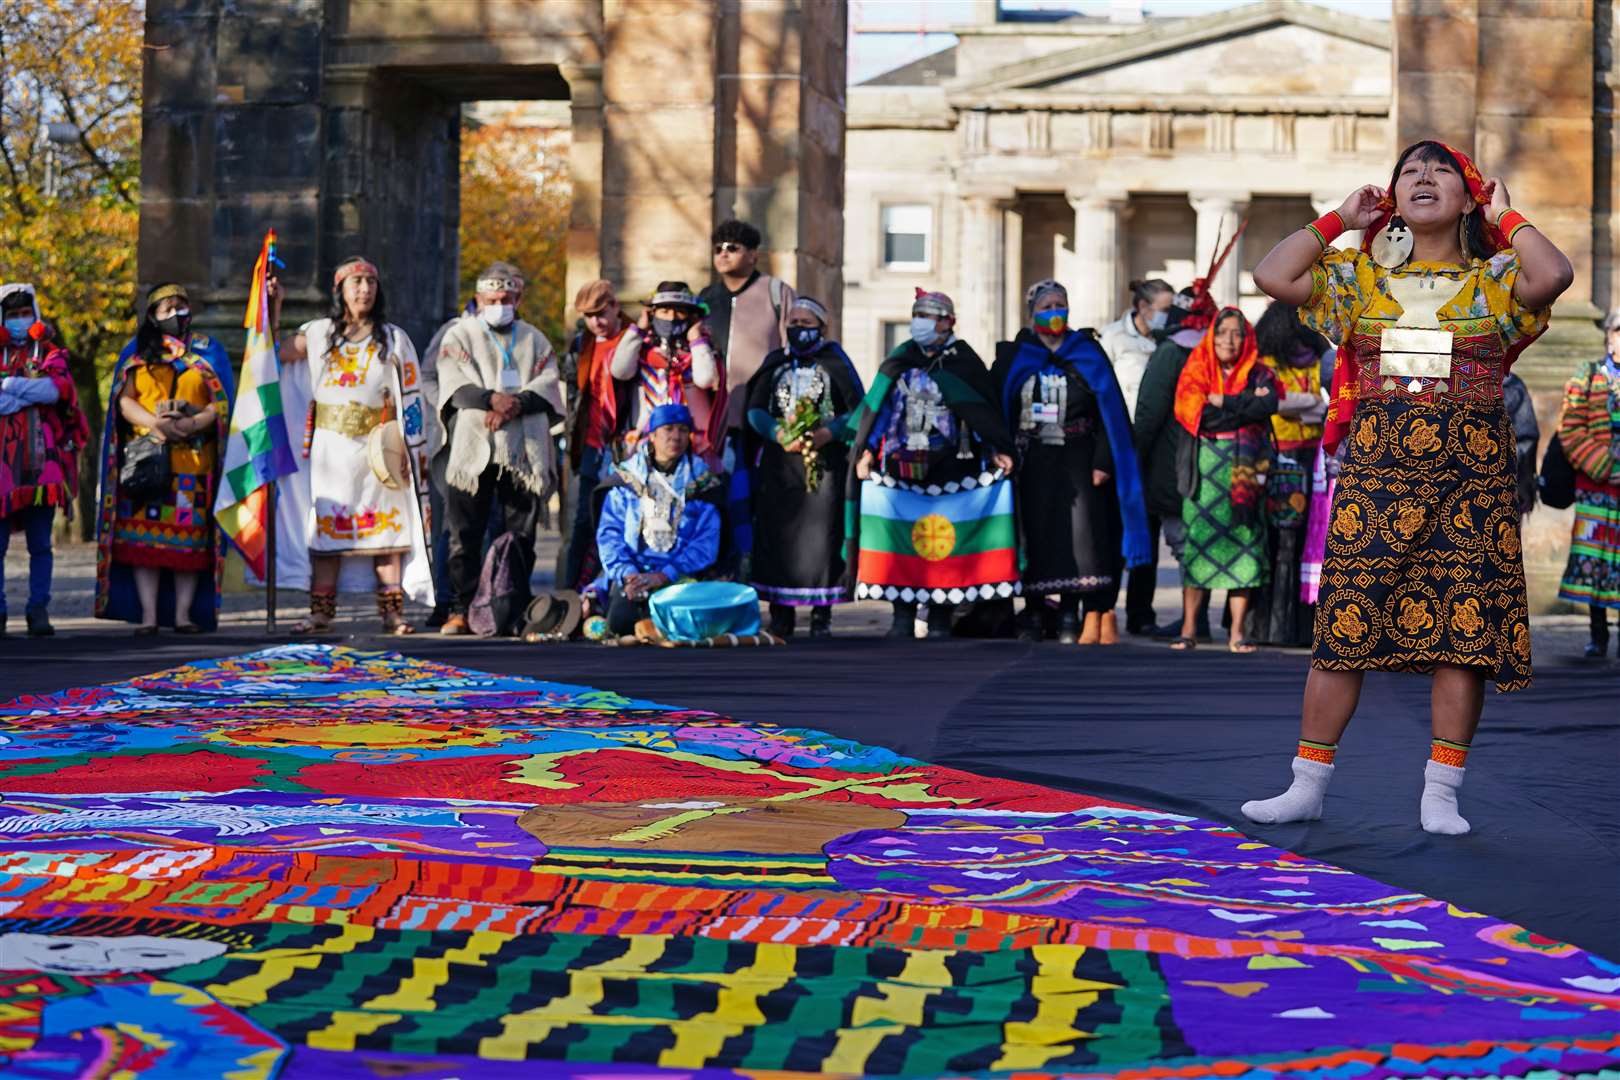 The indigenous peoples brought with them a colourful display as they highlighted their role (Jane Barlow/PA)